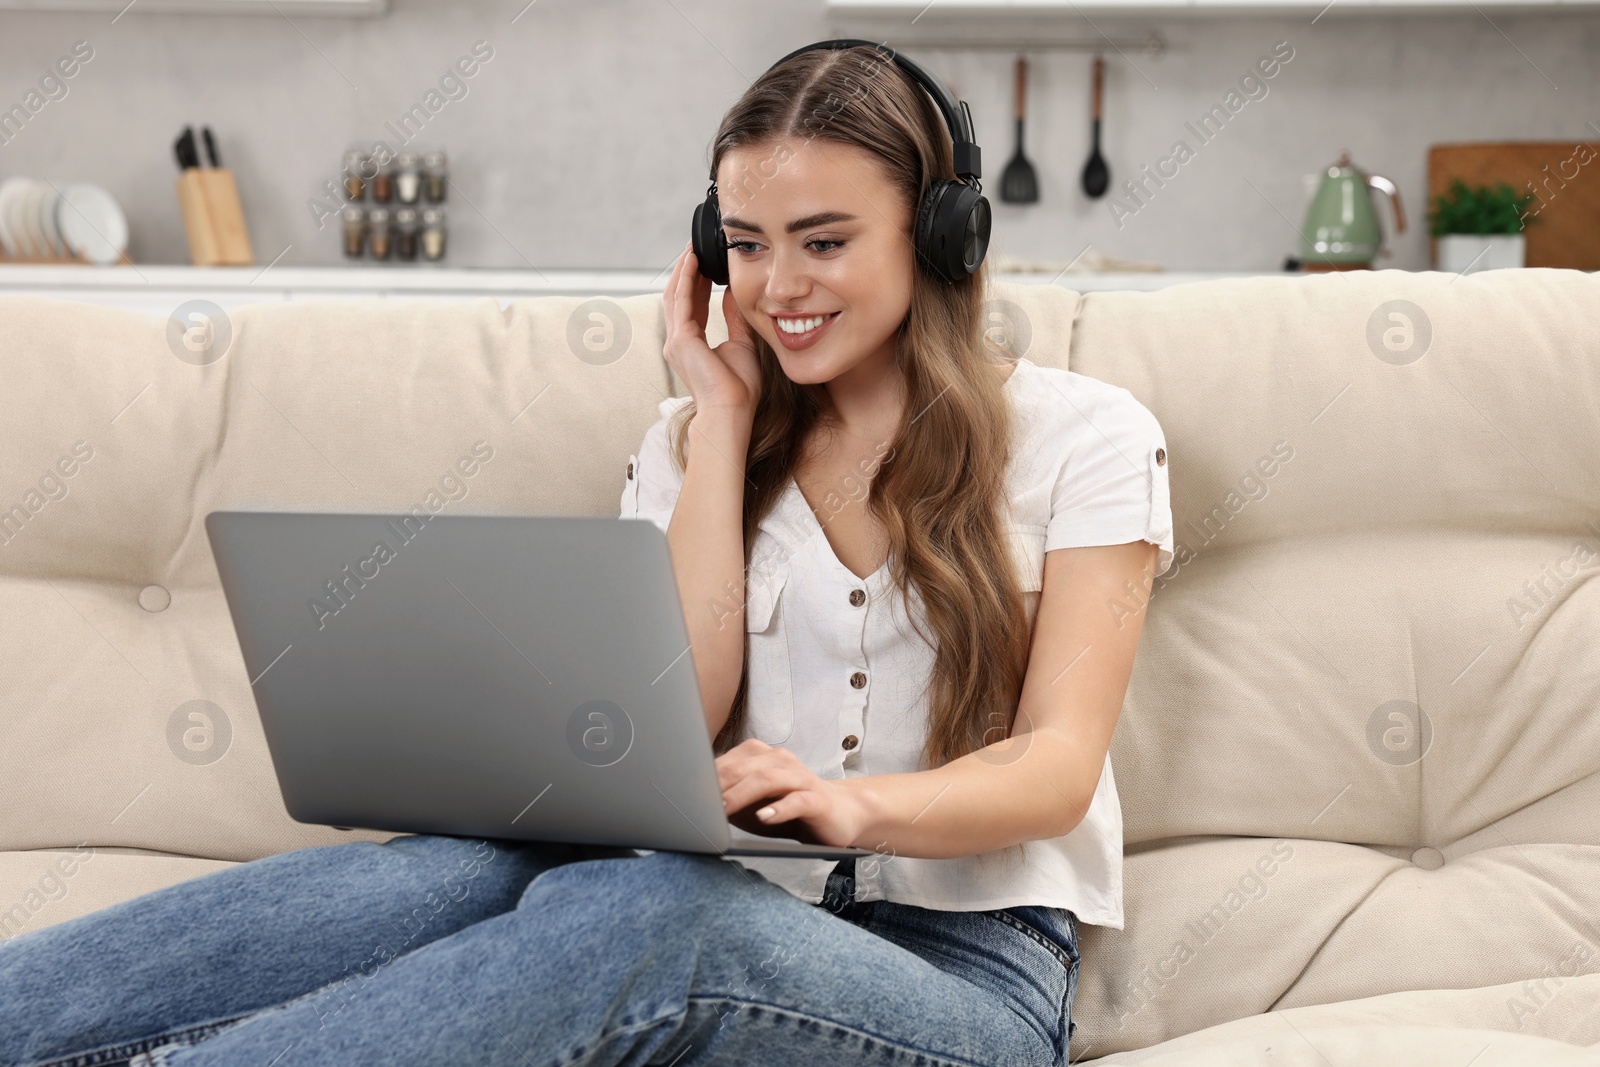 Photo of Happy woman with headphones and laptop on couch in room